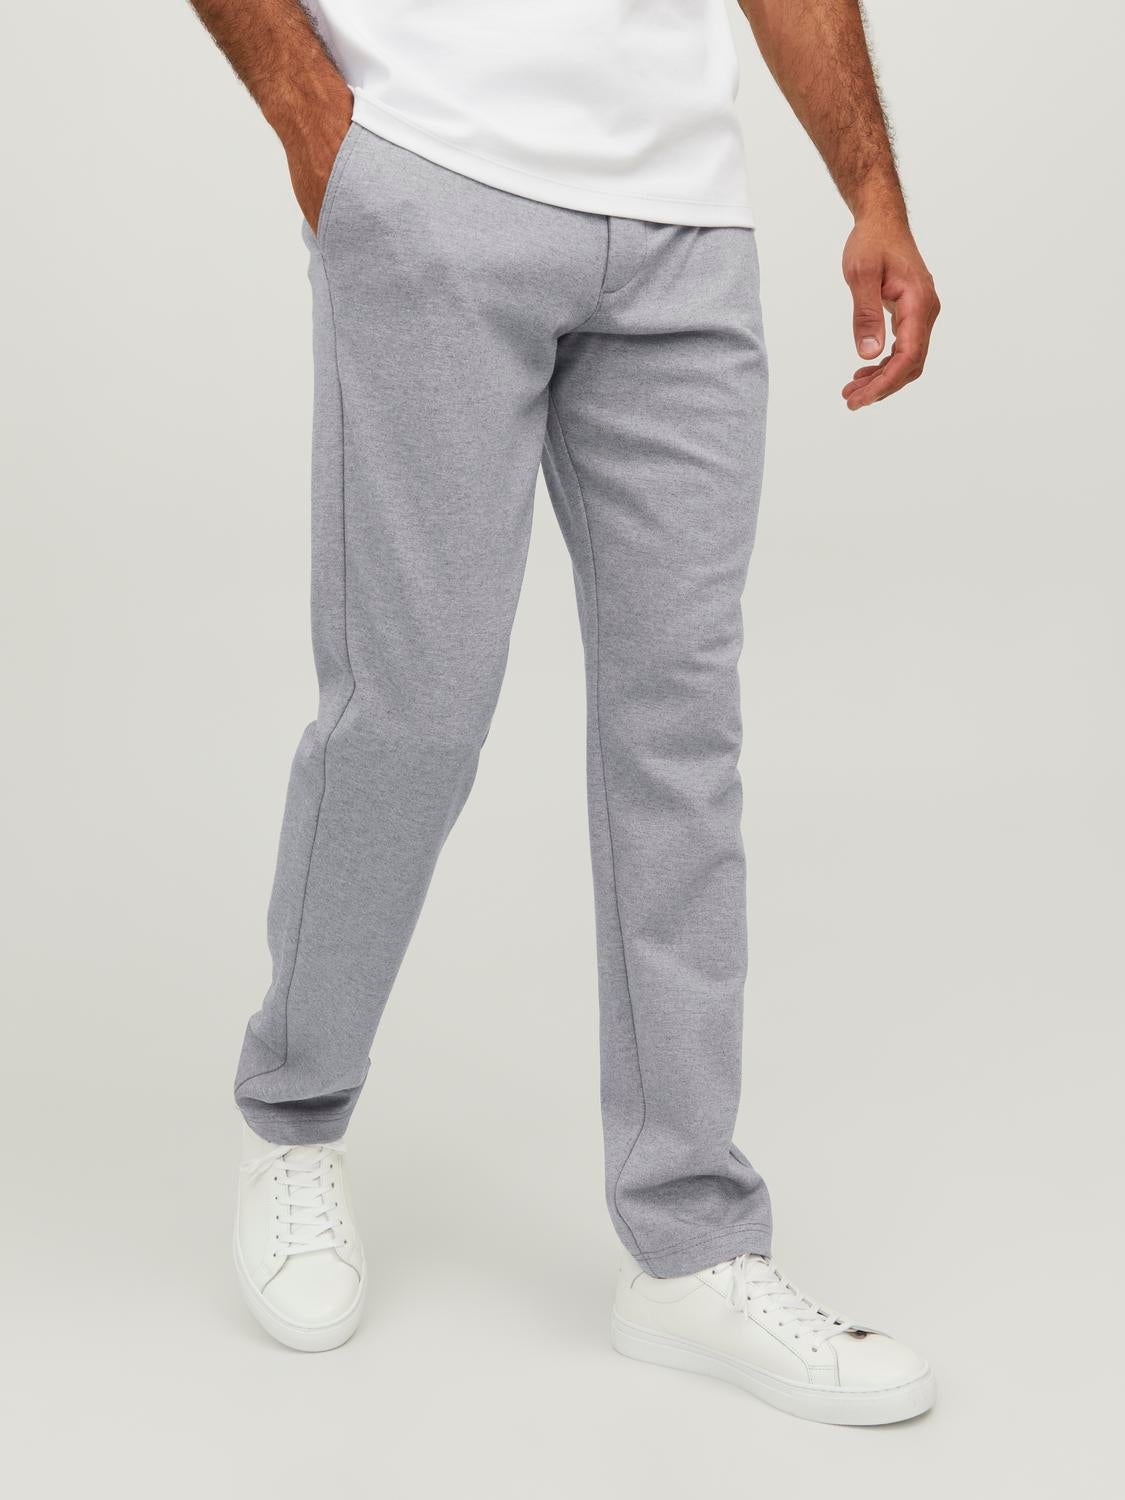 LOUIS PHILIPPE Skinny Fit Men Grey Trousers - Buy LOUIS PHILIPPE Skinny Fit  Men Grey Trousers Online at Best Prices in India | Flipkart.com